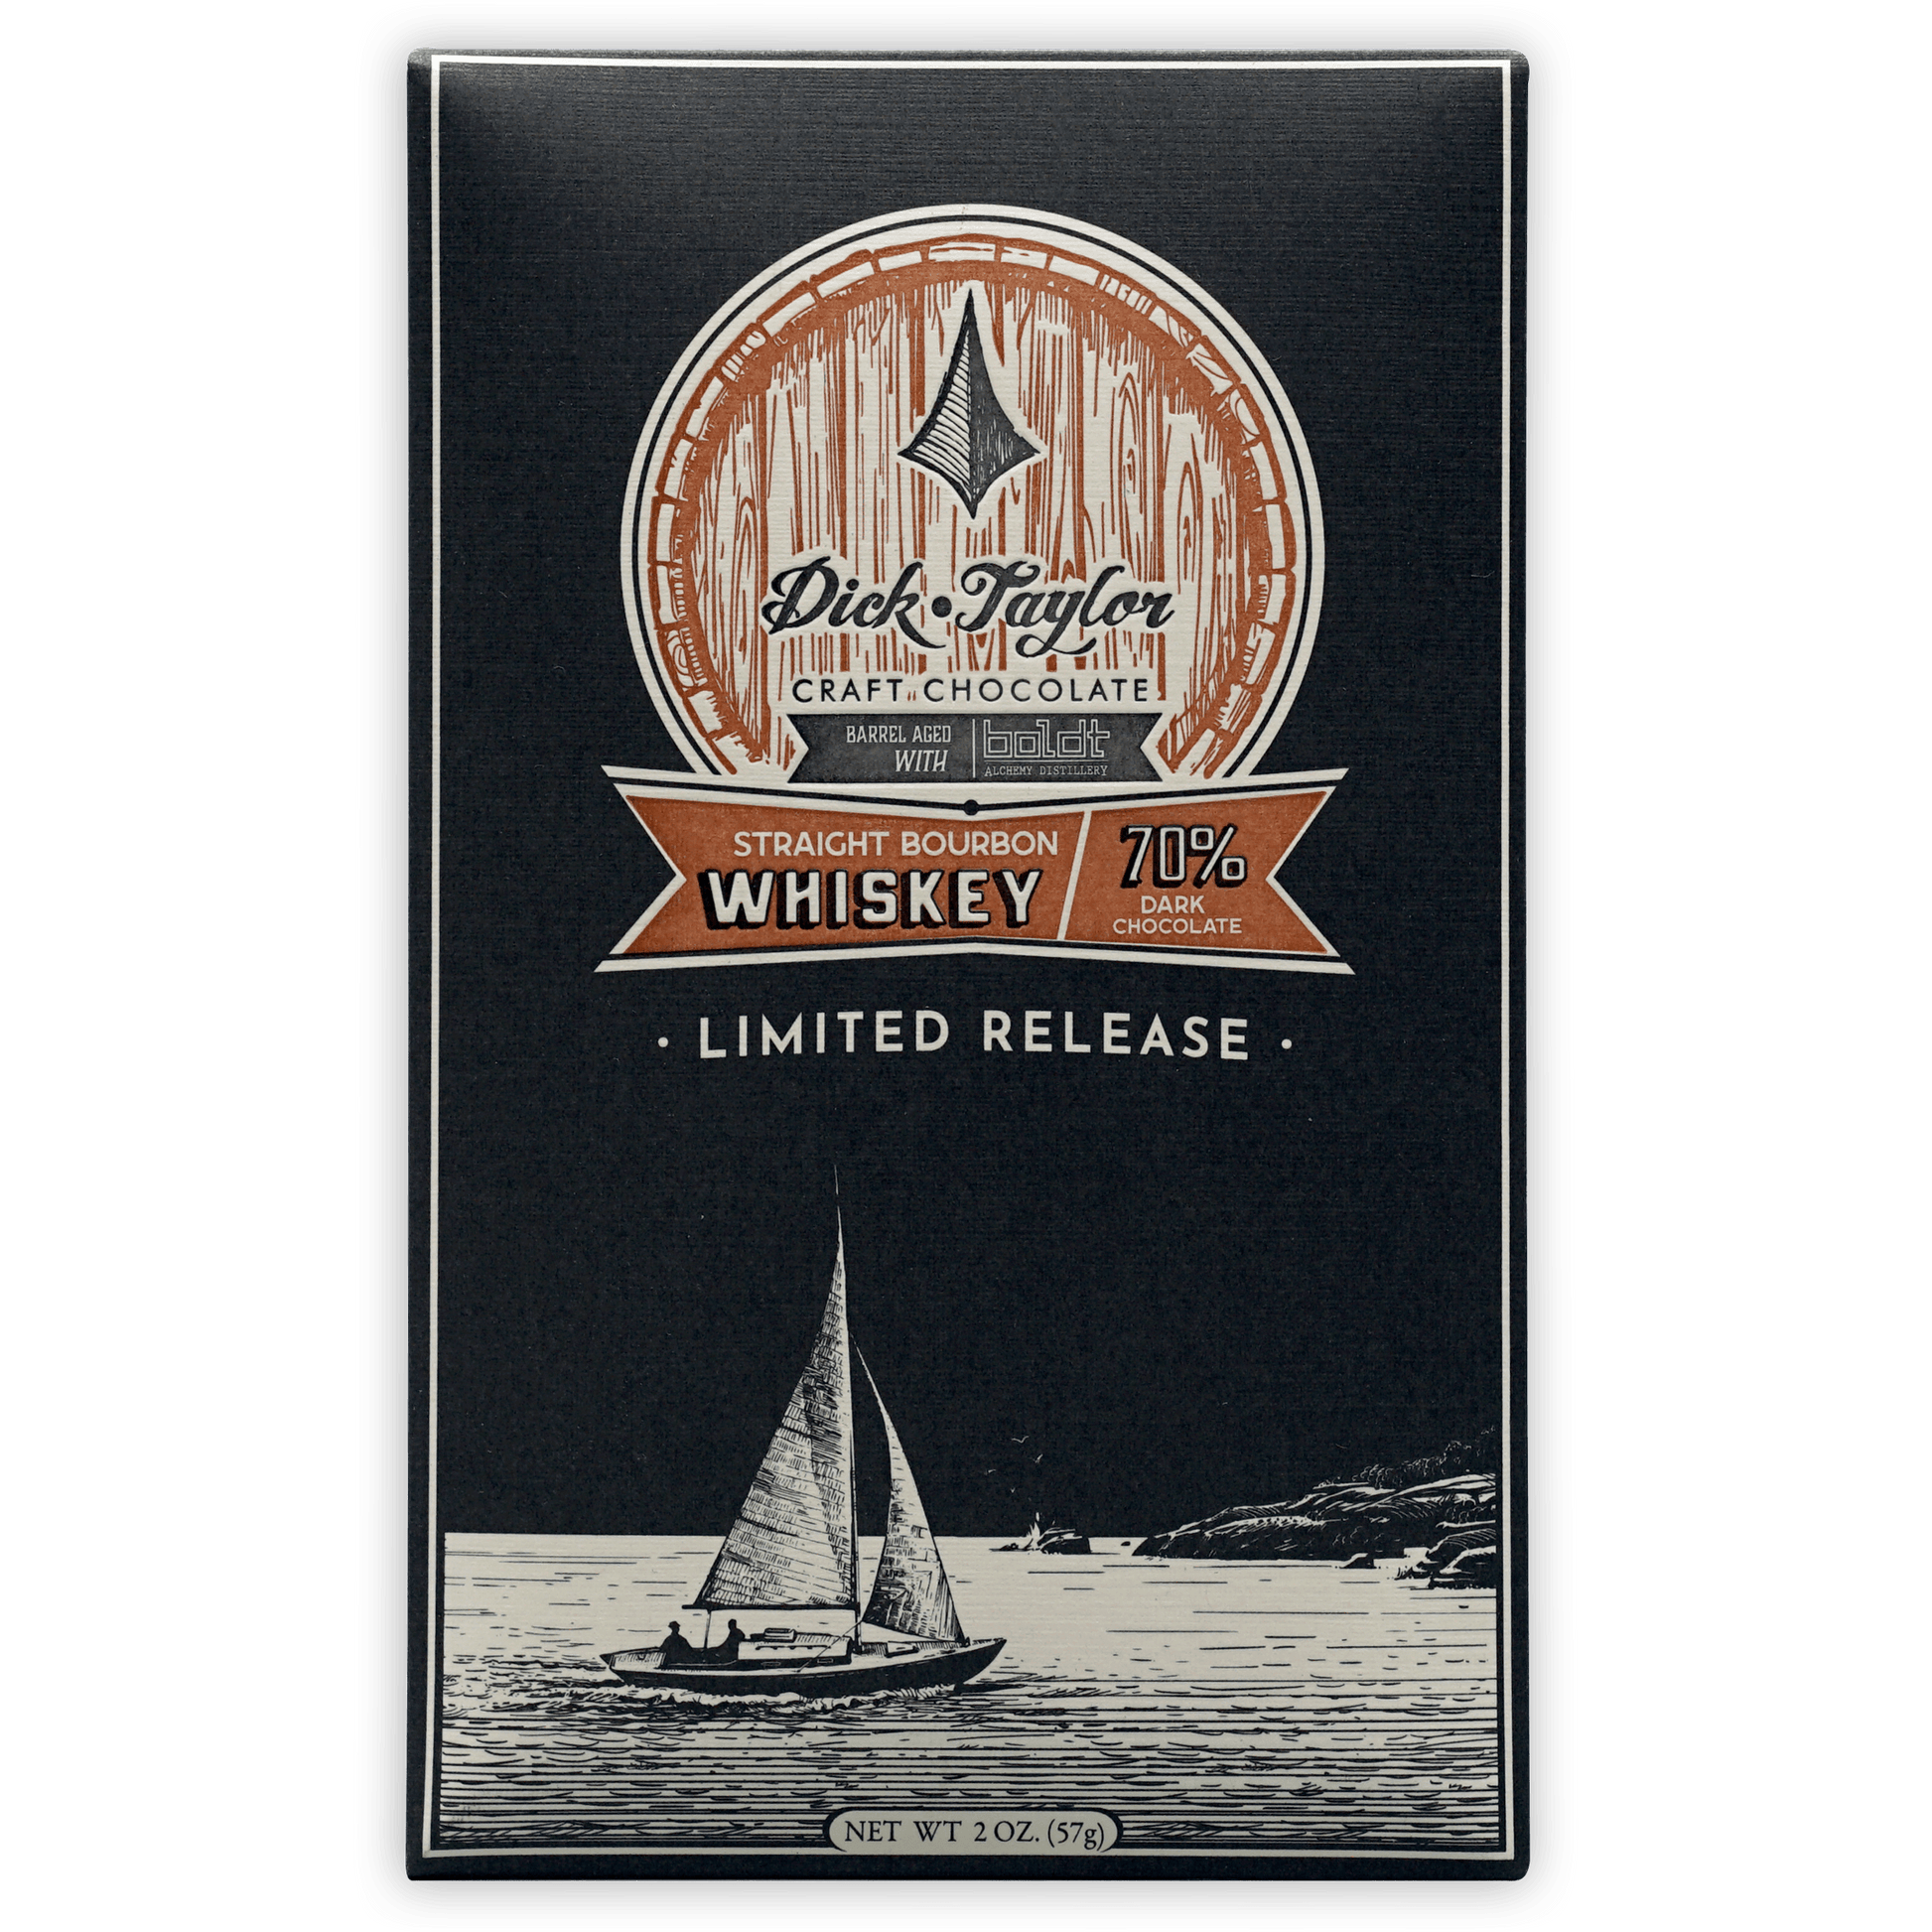 Dick Taylor Straight Bourbon Whiskey Chocolate (Limited Release)